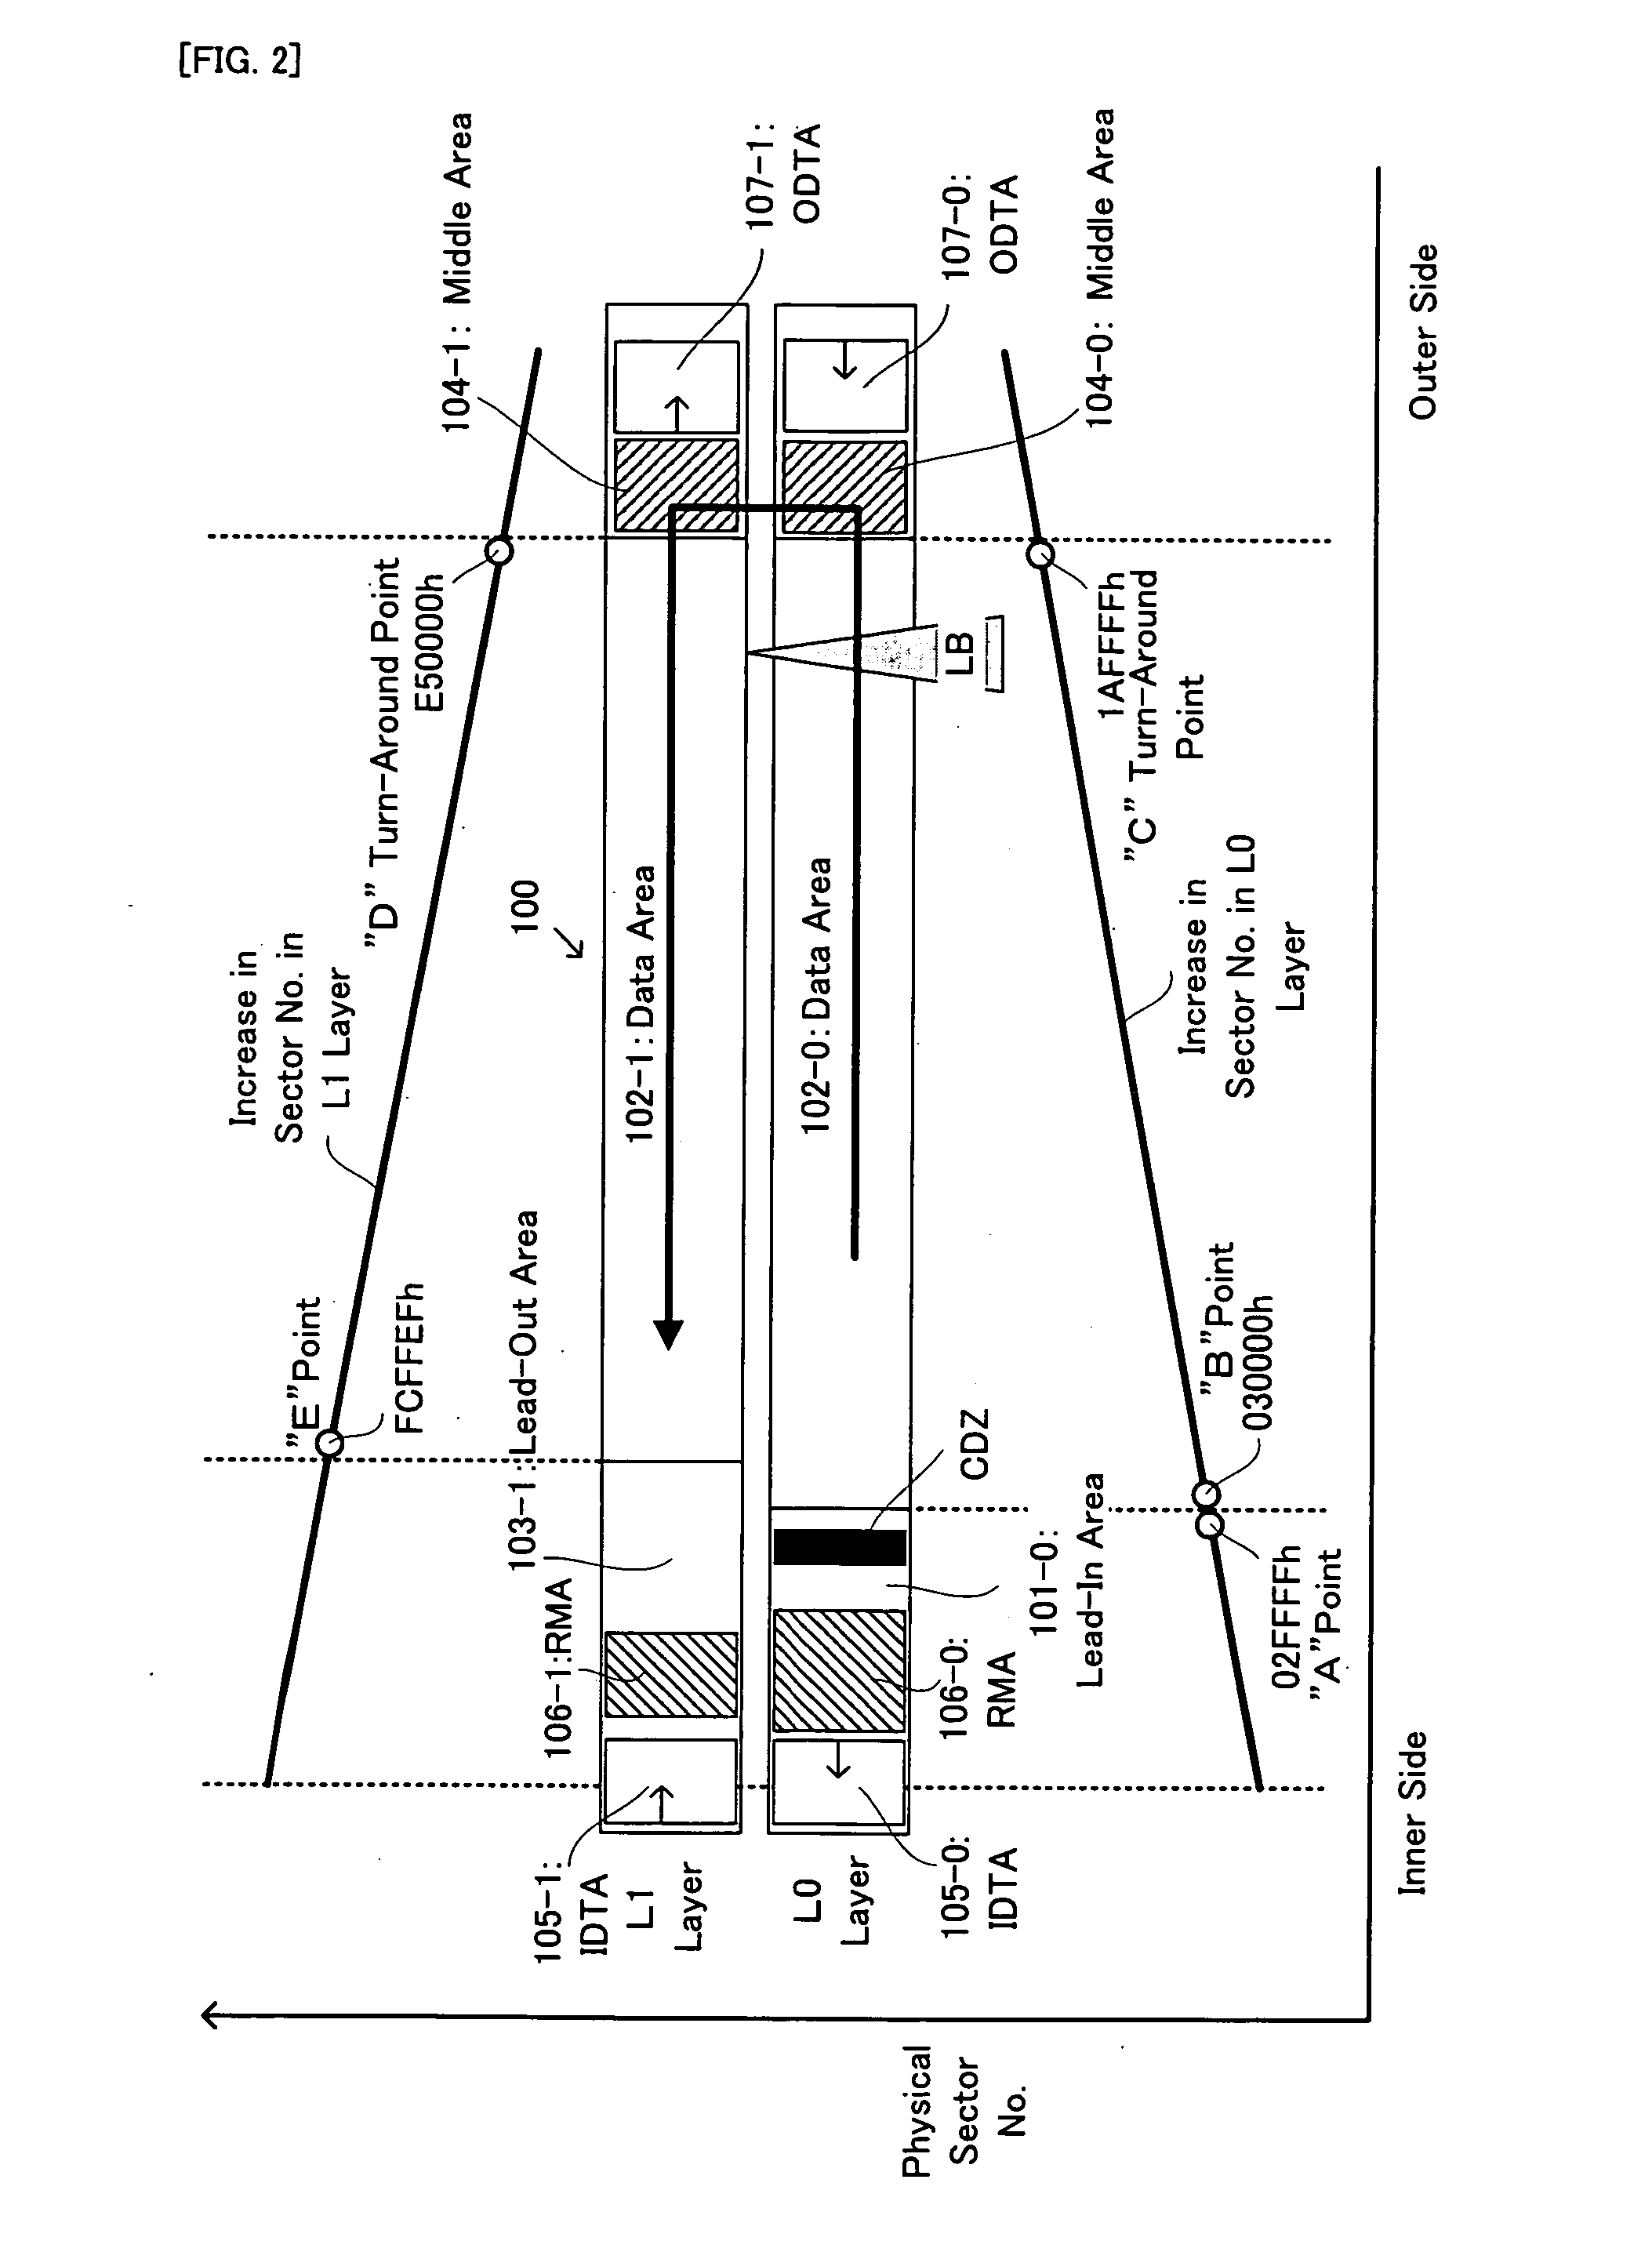 Information recording apparatus and method, and computer program for recording control